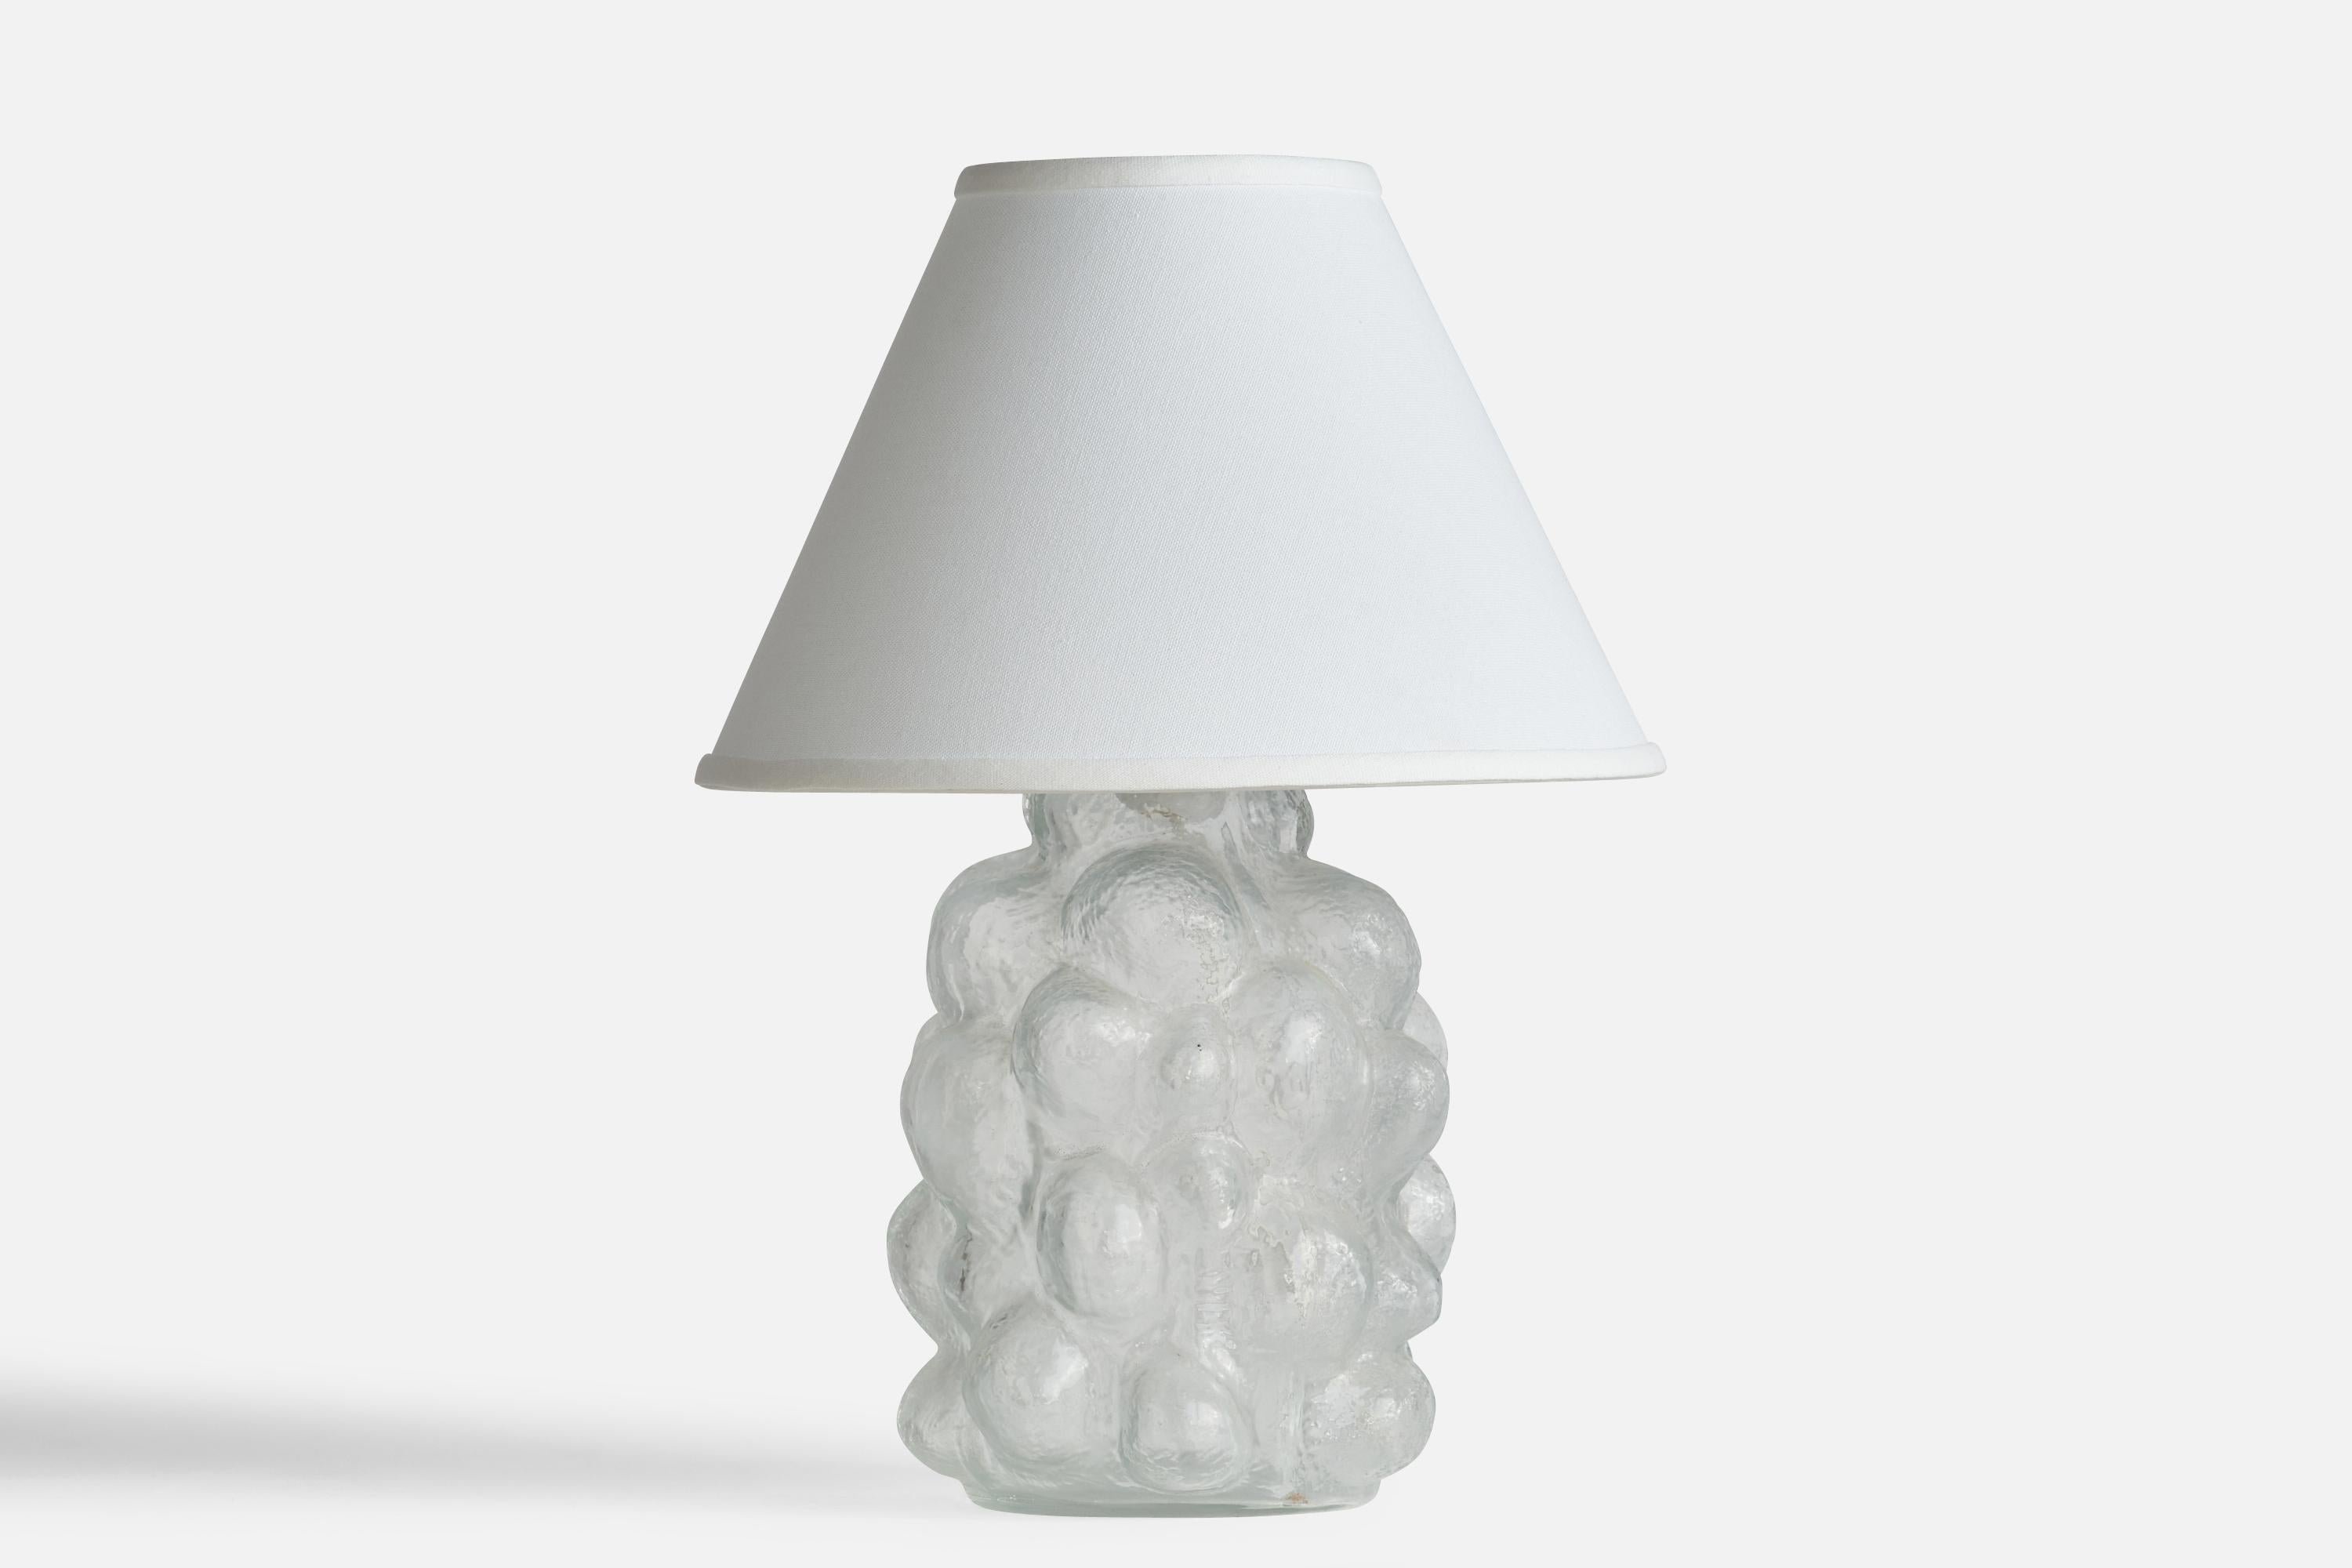 A glass table lamp designed and produced in Sweden, c. 1960s.

Dimensions of Lamp (inches): 11.4” H x 7” Diameter
Dimensions of Shade (inches): 5” Top Diameter x 12” Bottom Diameter x 8” H
Dimensions of Lamp with Shade (inches): 17.25” H x 12”